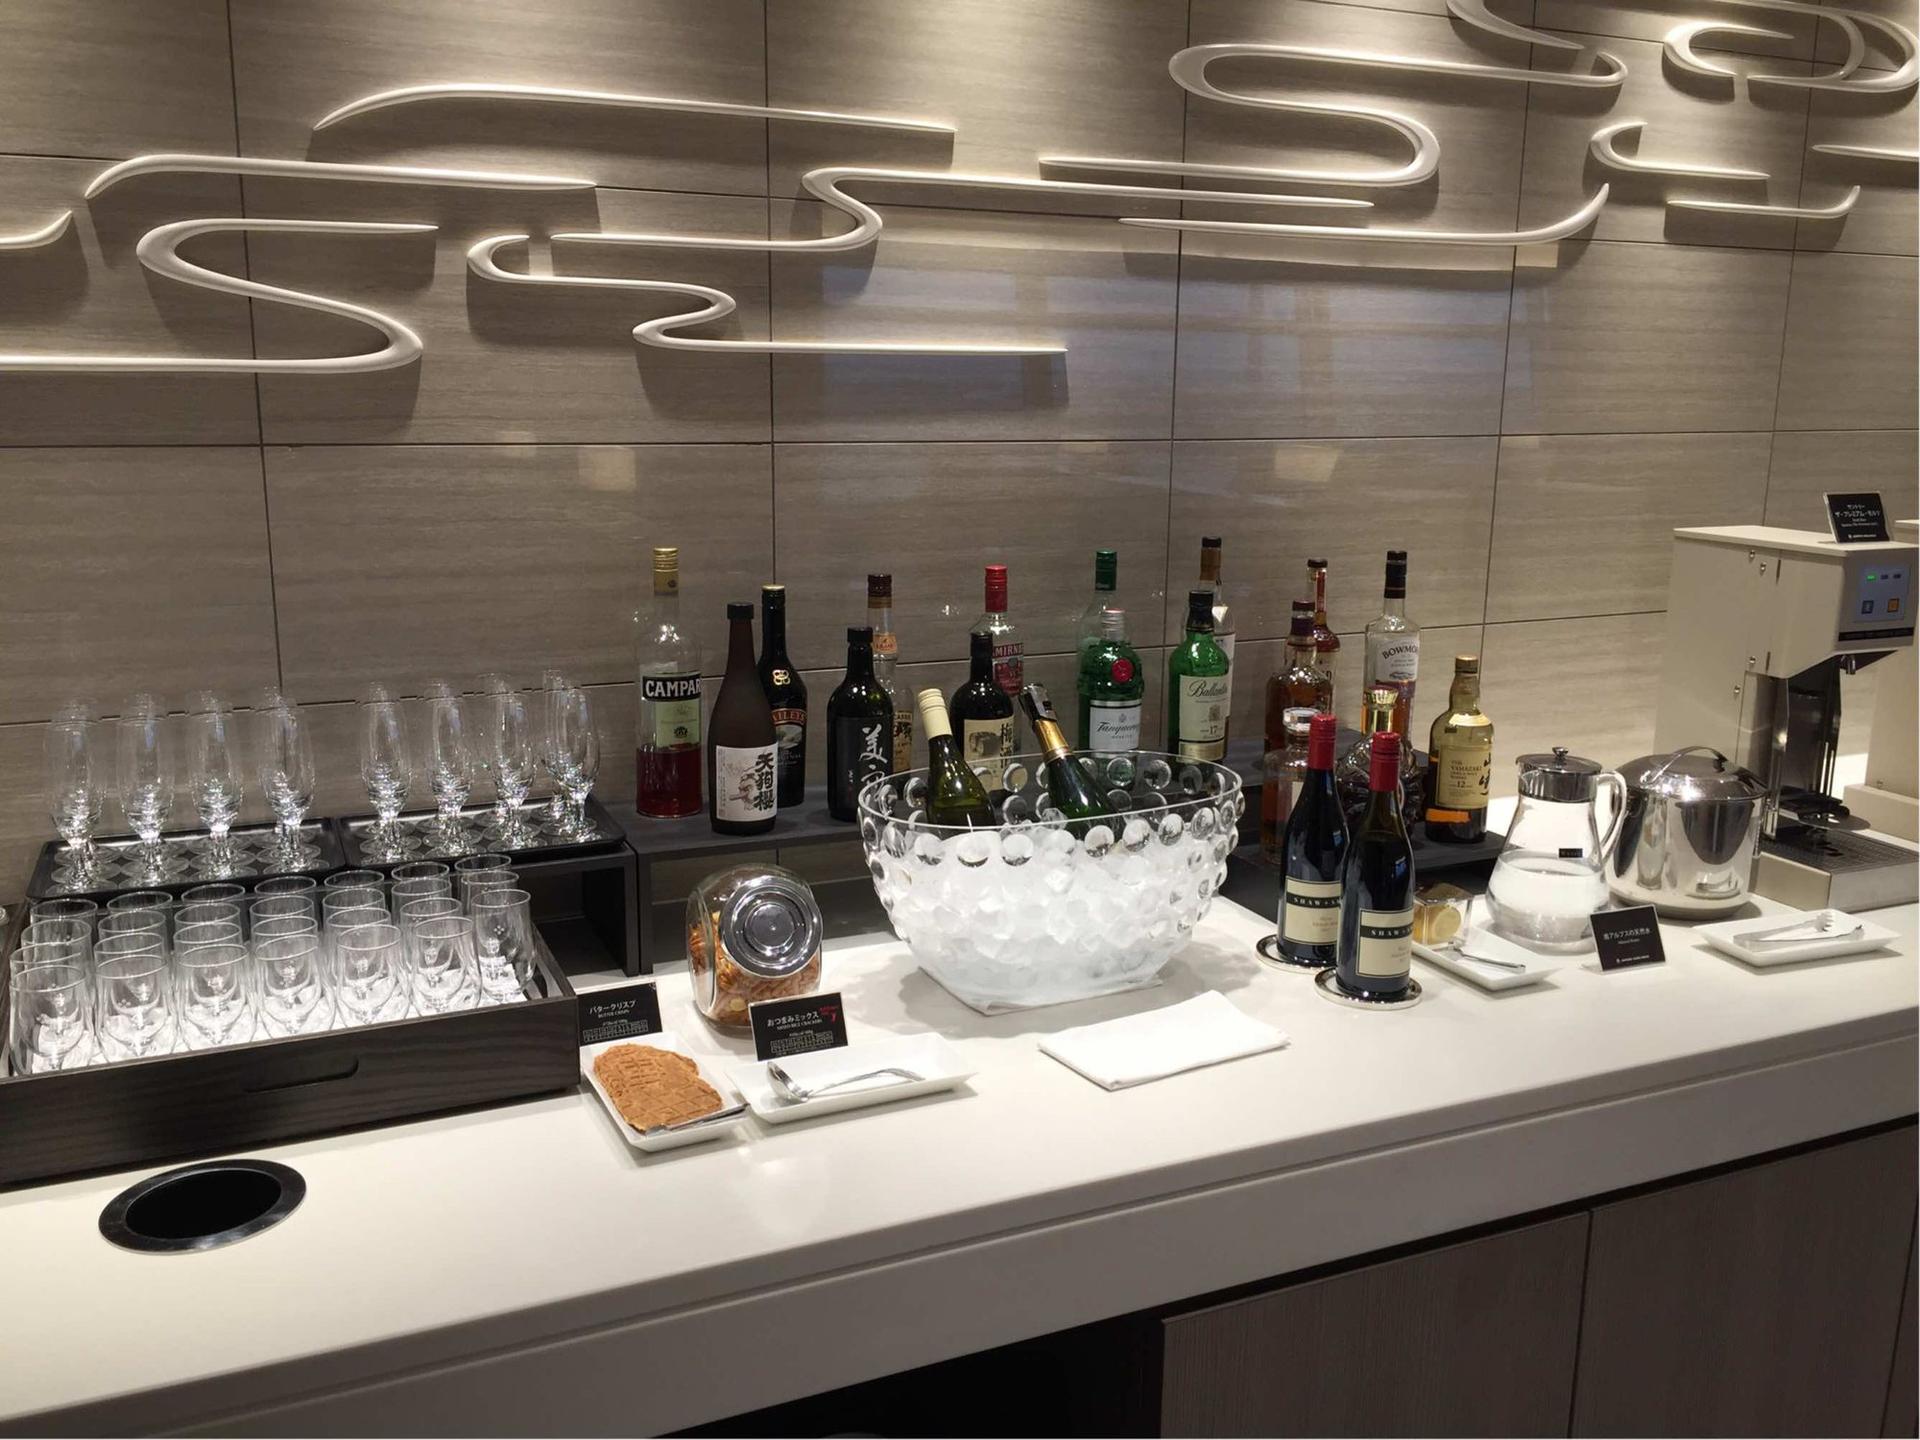 Japan Airlines JAL First Class Lounge image 10 of 43